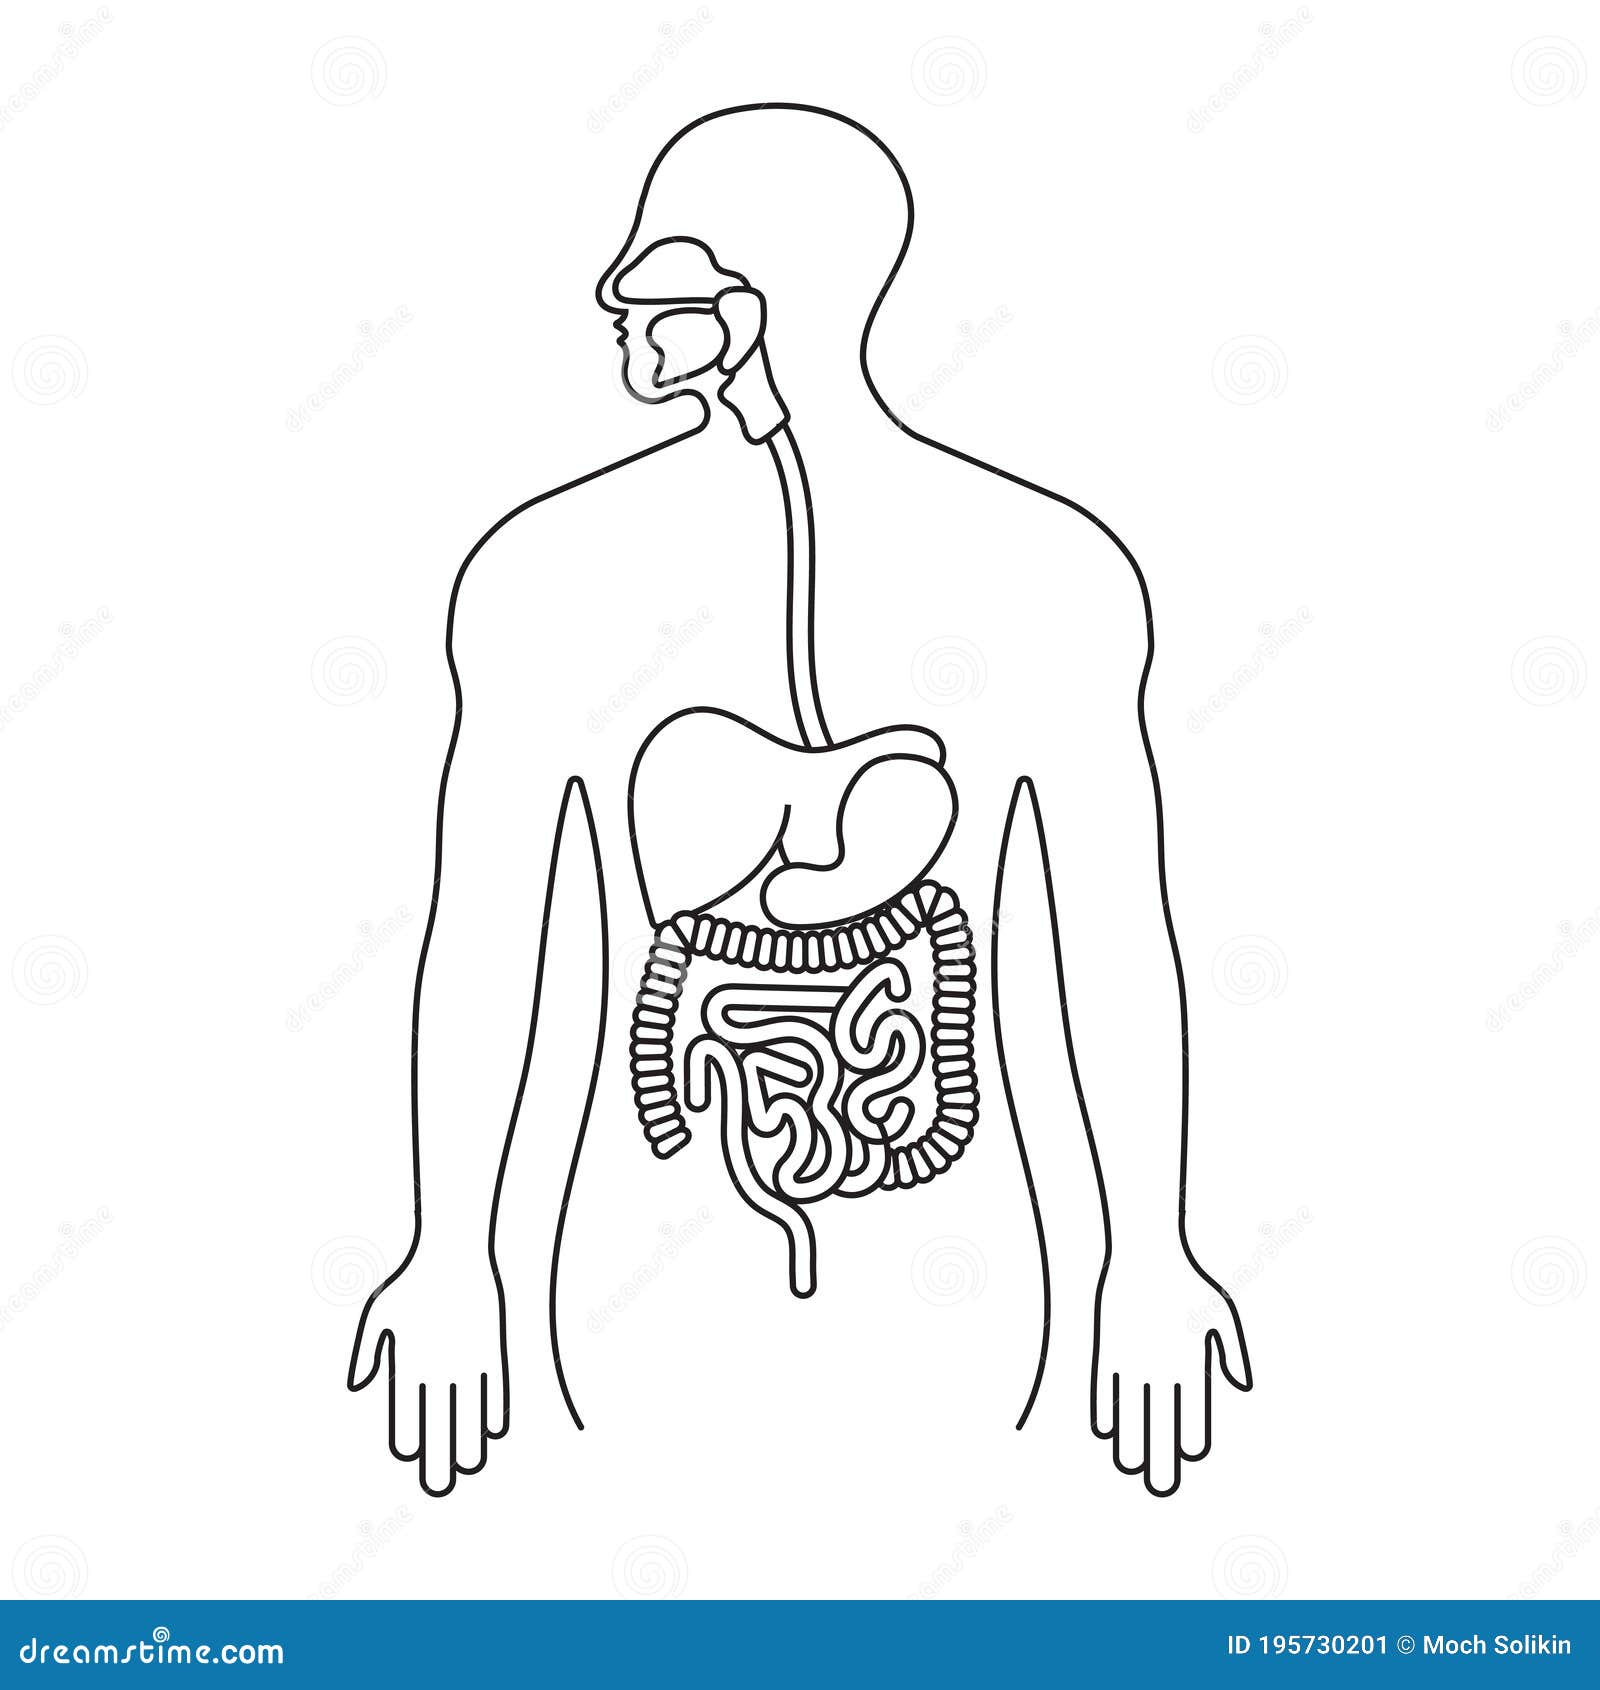 human gastrointestinal tract or digestive system line art icon for apps and websites